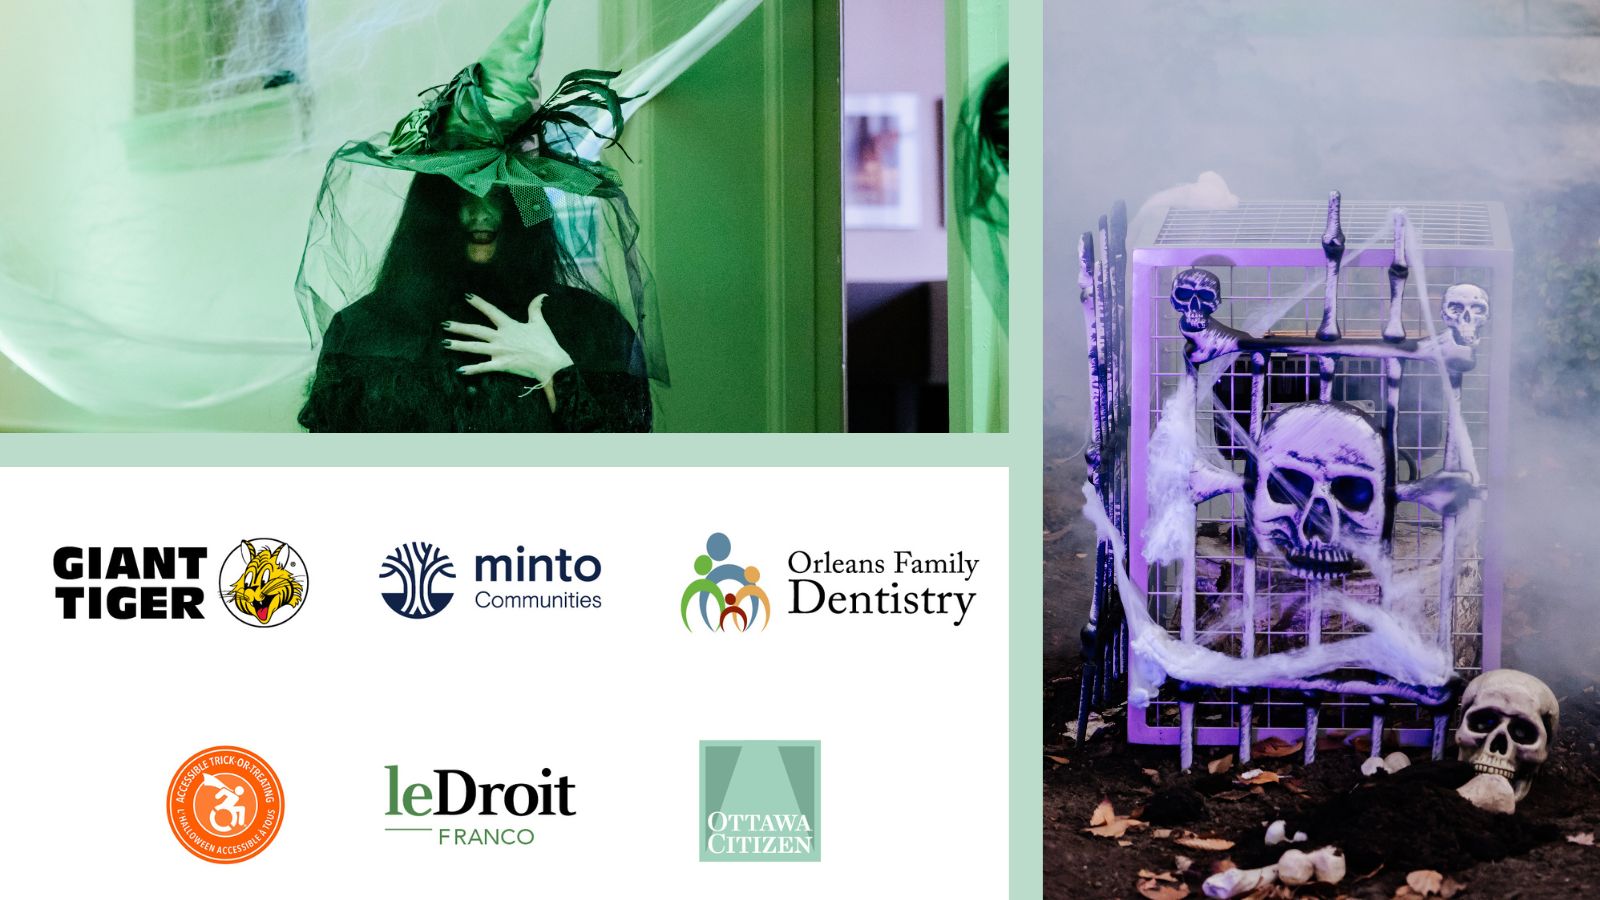 A collage featuring the event sponsor logos, an image of a woman dressed as a witch, and a close-up image of a skeleton Halloween decoration.